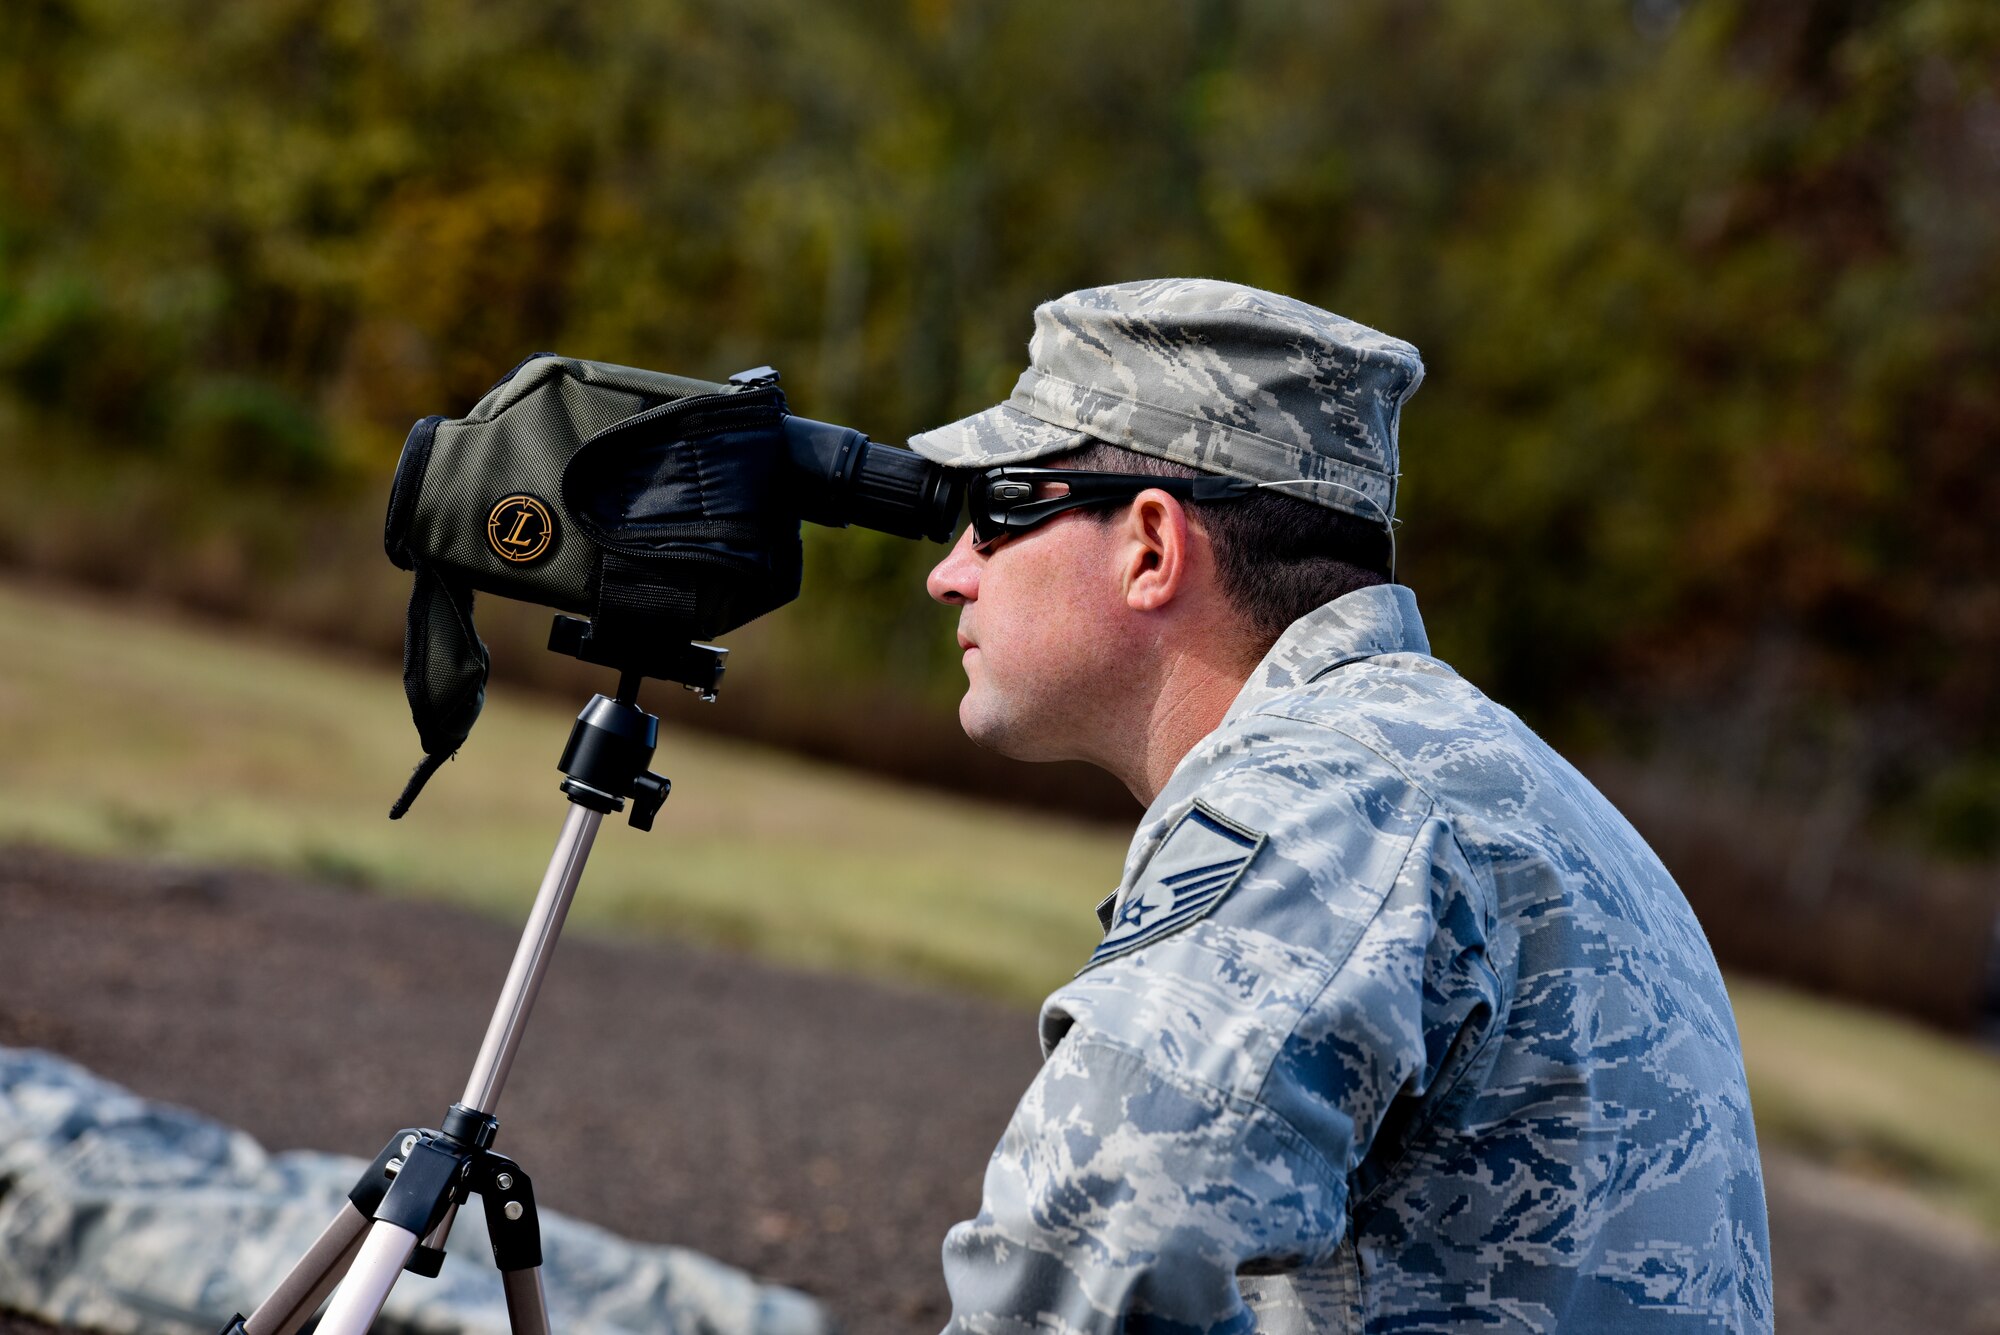 Master Sgt. Brian Detherage, officer in charge of range operations and 188th Security Forces member, watches and provides feedback on target adjustments to fellow 188th Security Forces Squadron Airmen during known distance sniper and advanced designated marksman qualification Nov. 6, 2015 at Fort Chaffee Joint Maneuver Training Center, Ark. 188th SFS members qualified on the M-24 rifle at designated distances of 100, 300, 400 and 500 yards and with moving targets to maintain combat readiness and efficiency as marksmen. (U.S. Air National Guard photo by Capt. Holli Nelson)